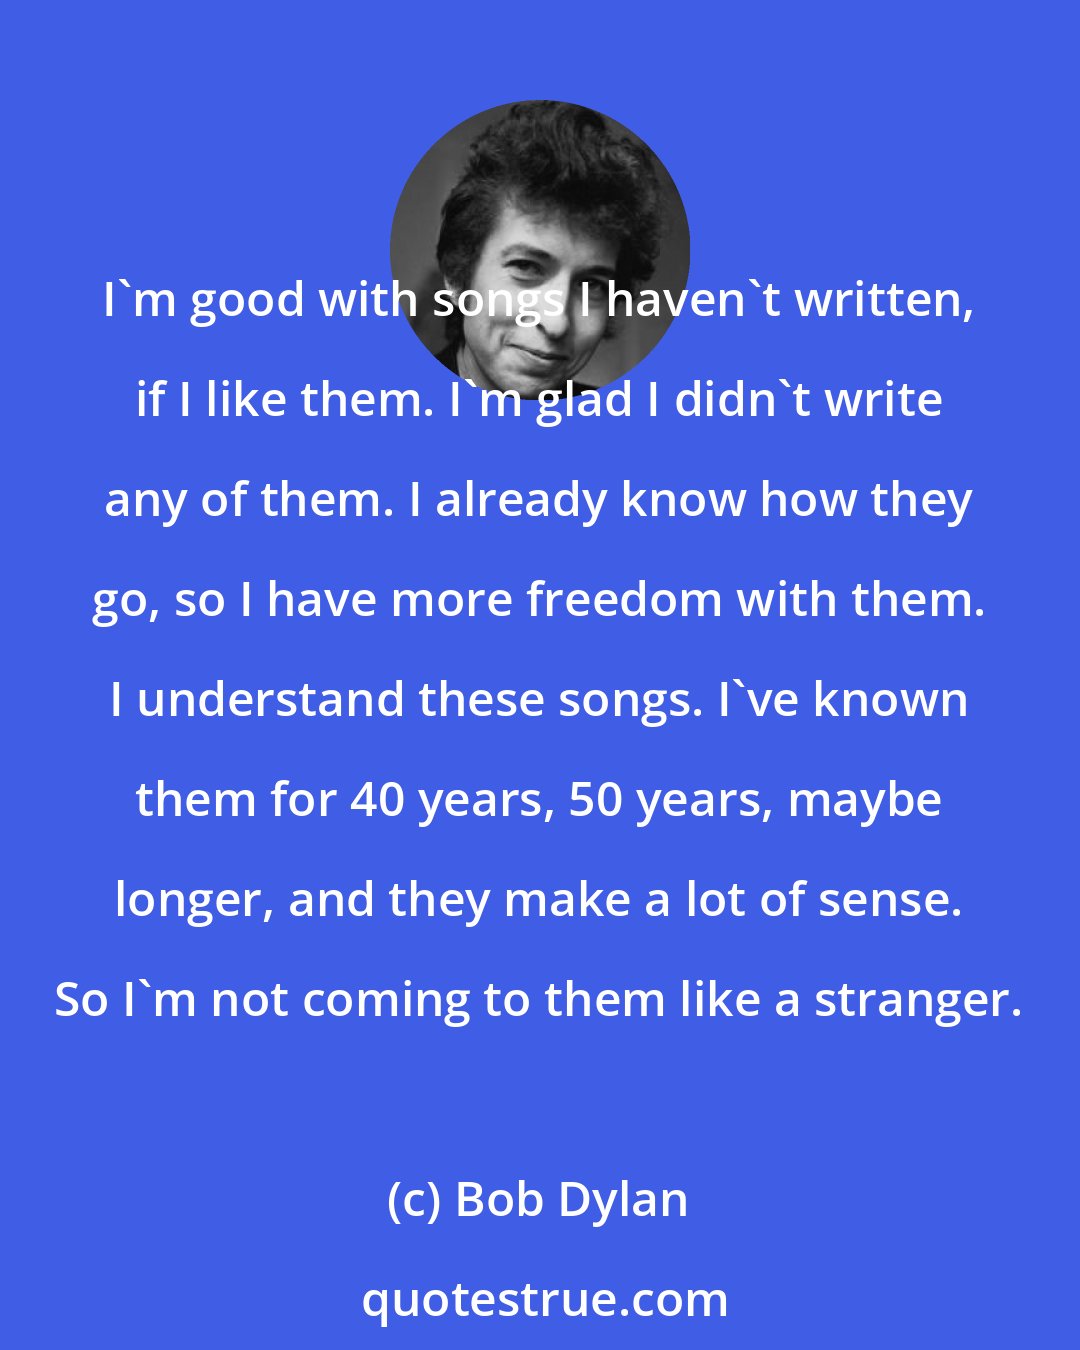 Bob Dylan: I'm good with songs I haven't written, if I like them. I'm glad I didn't write any of them. I already know how they go, so I have more freedom with them. I understand these songs. I've known them for 40 years, 50 years, maybe longer, and they make a lot of sense. So I'm not coming to them like a stranger.